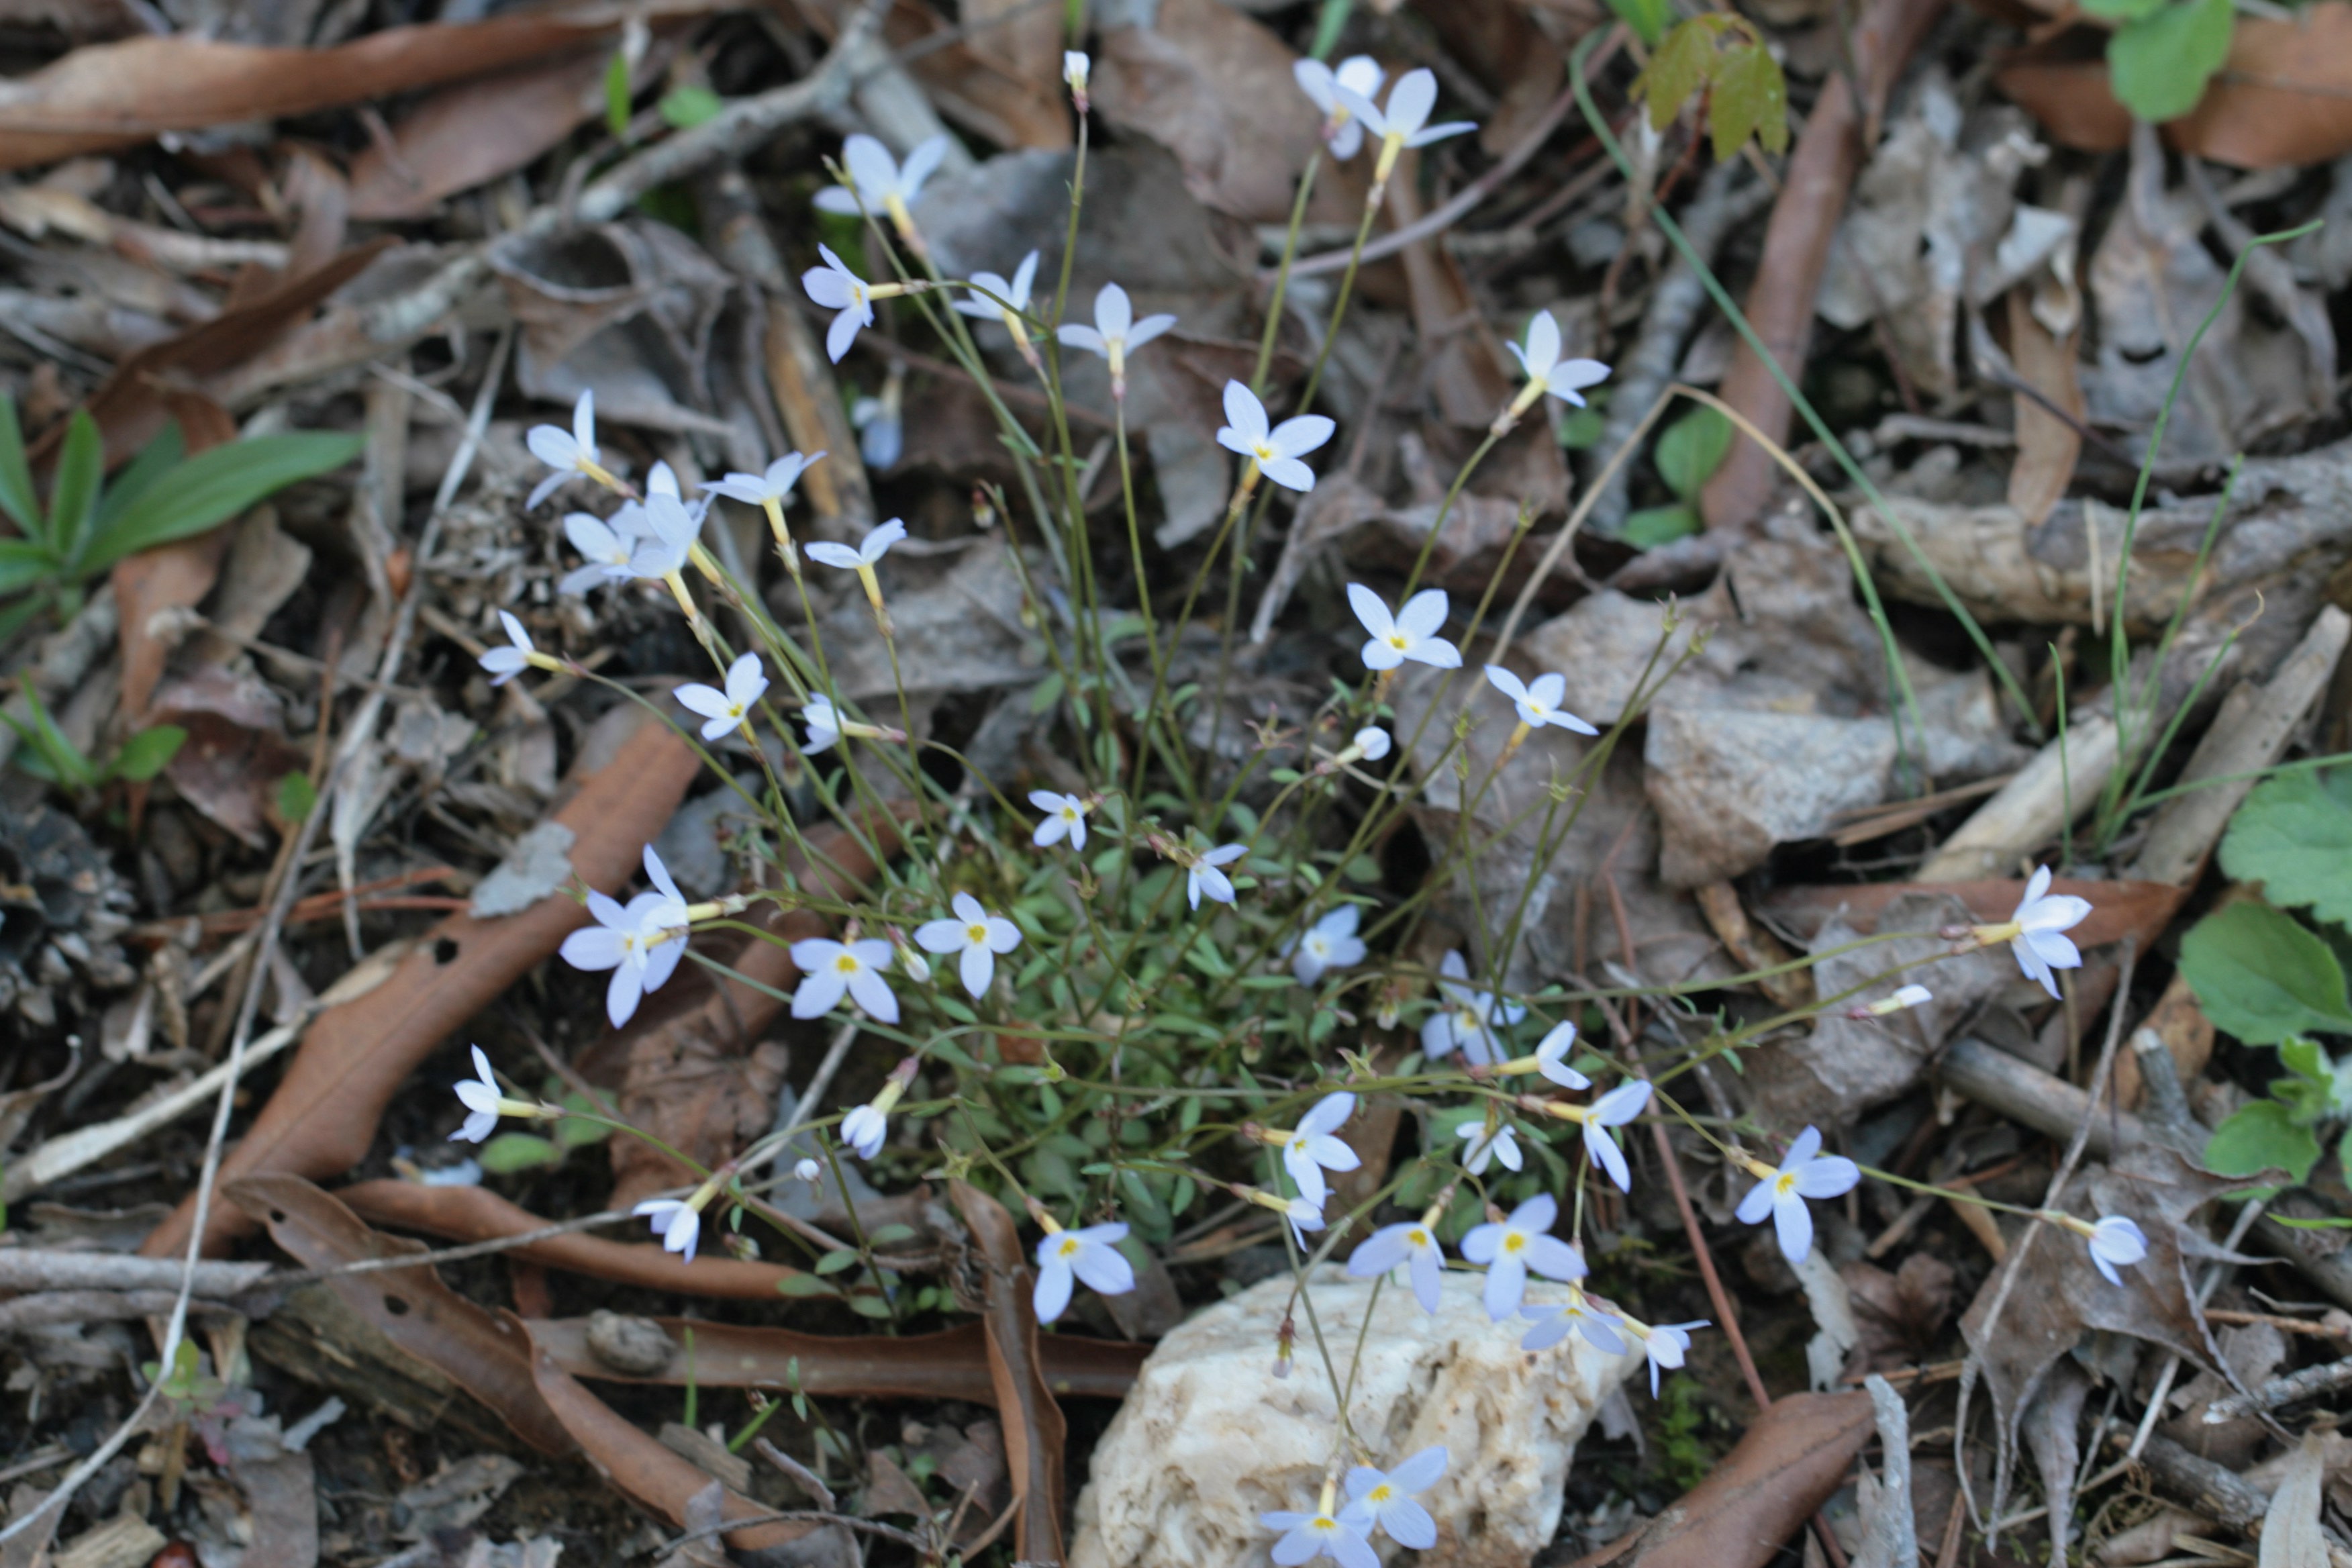 The Scientific Name is Houstonia caerulea. You will likely hear them called Quaker Ladies, Innocence, Common Bluet. This picture shows the Tiny plant with round basal leaves, paired stem leaves, and small blue flowers atop a rather long peduncle. Plants are found in clusters. of Houstonia caerulea